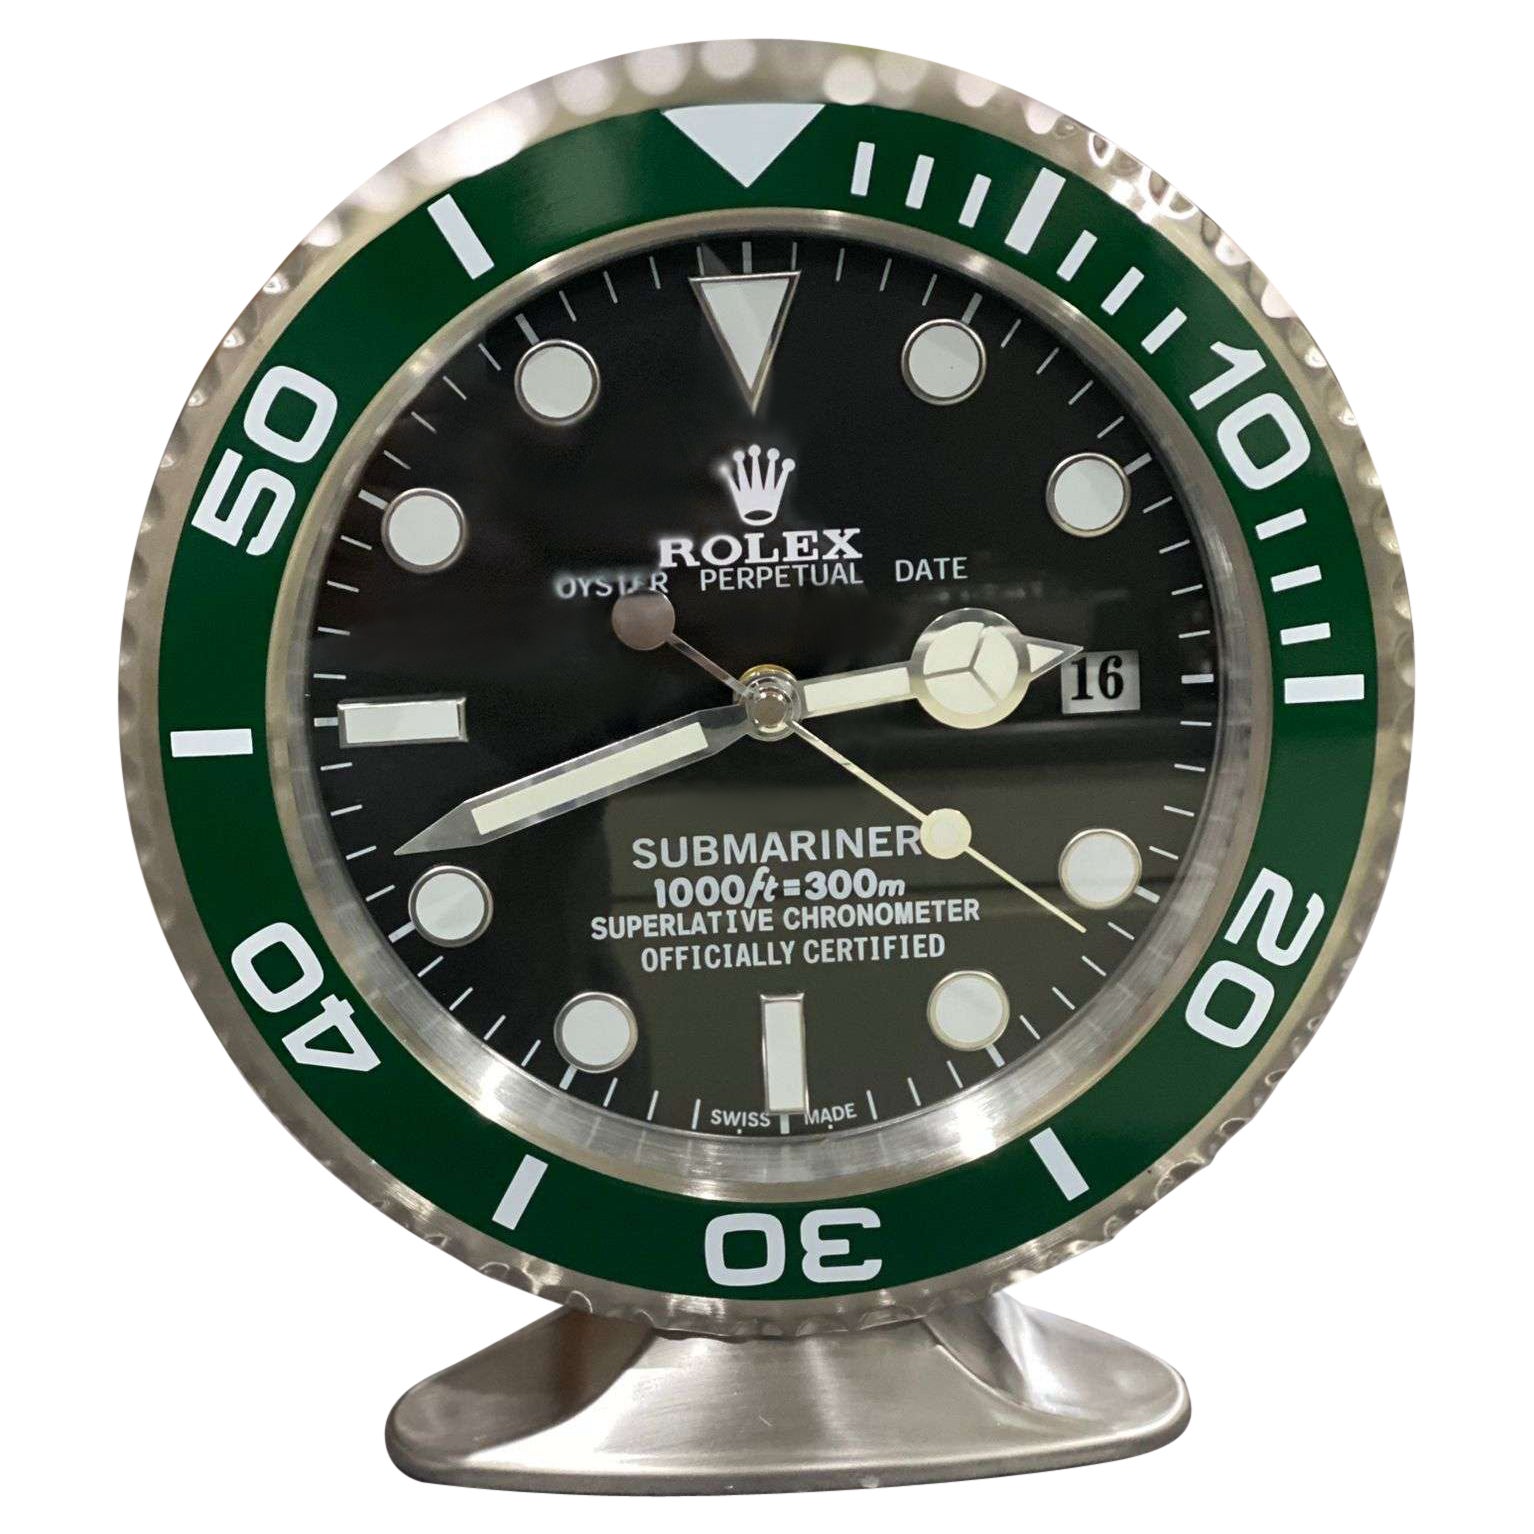 ROLEX Officially Certified Oyster Perpetual Green Hulk Submariner Desk Clock  For Sale